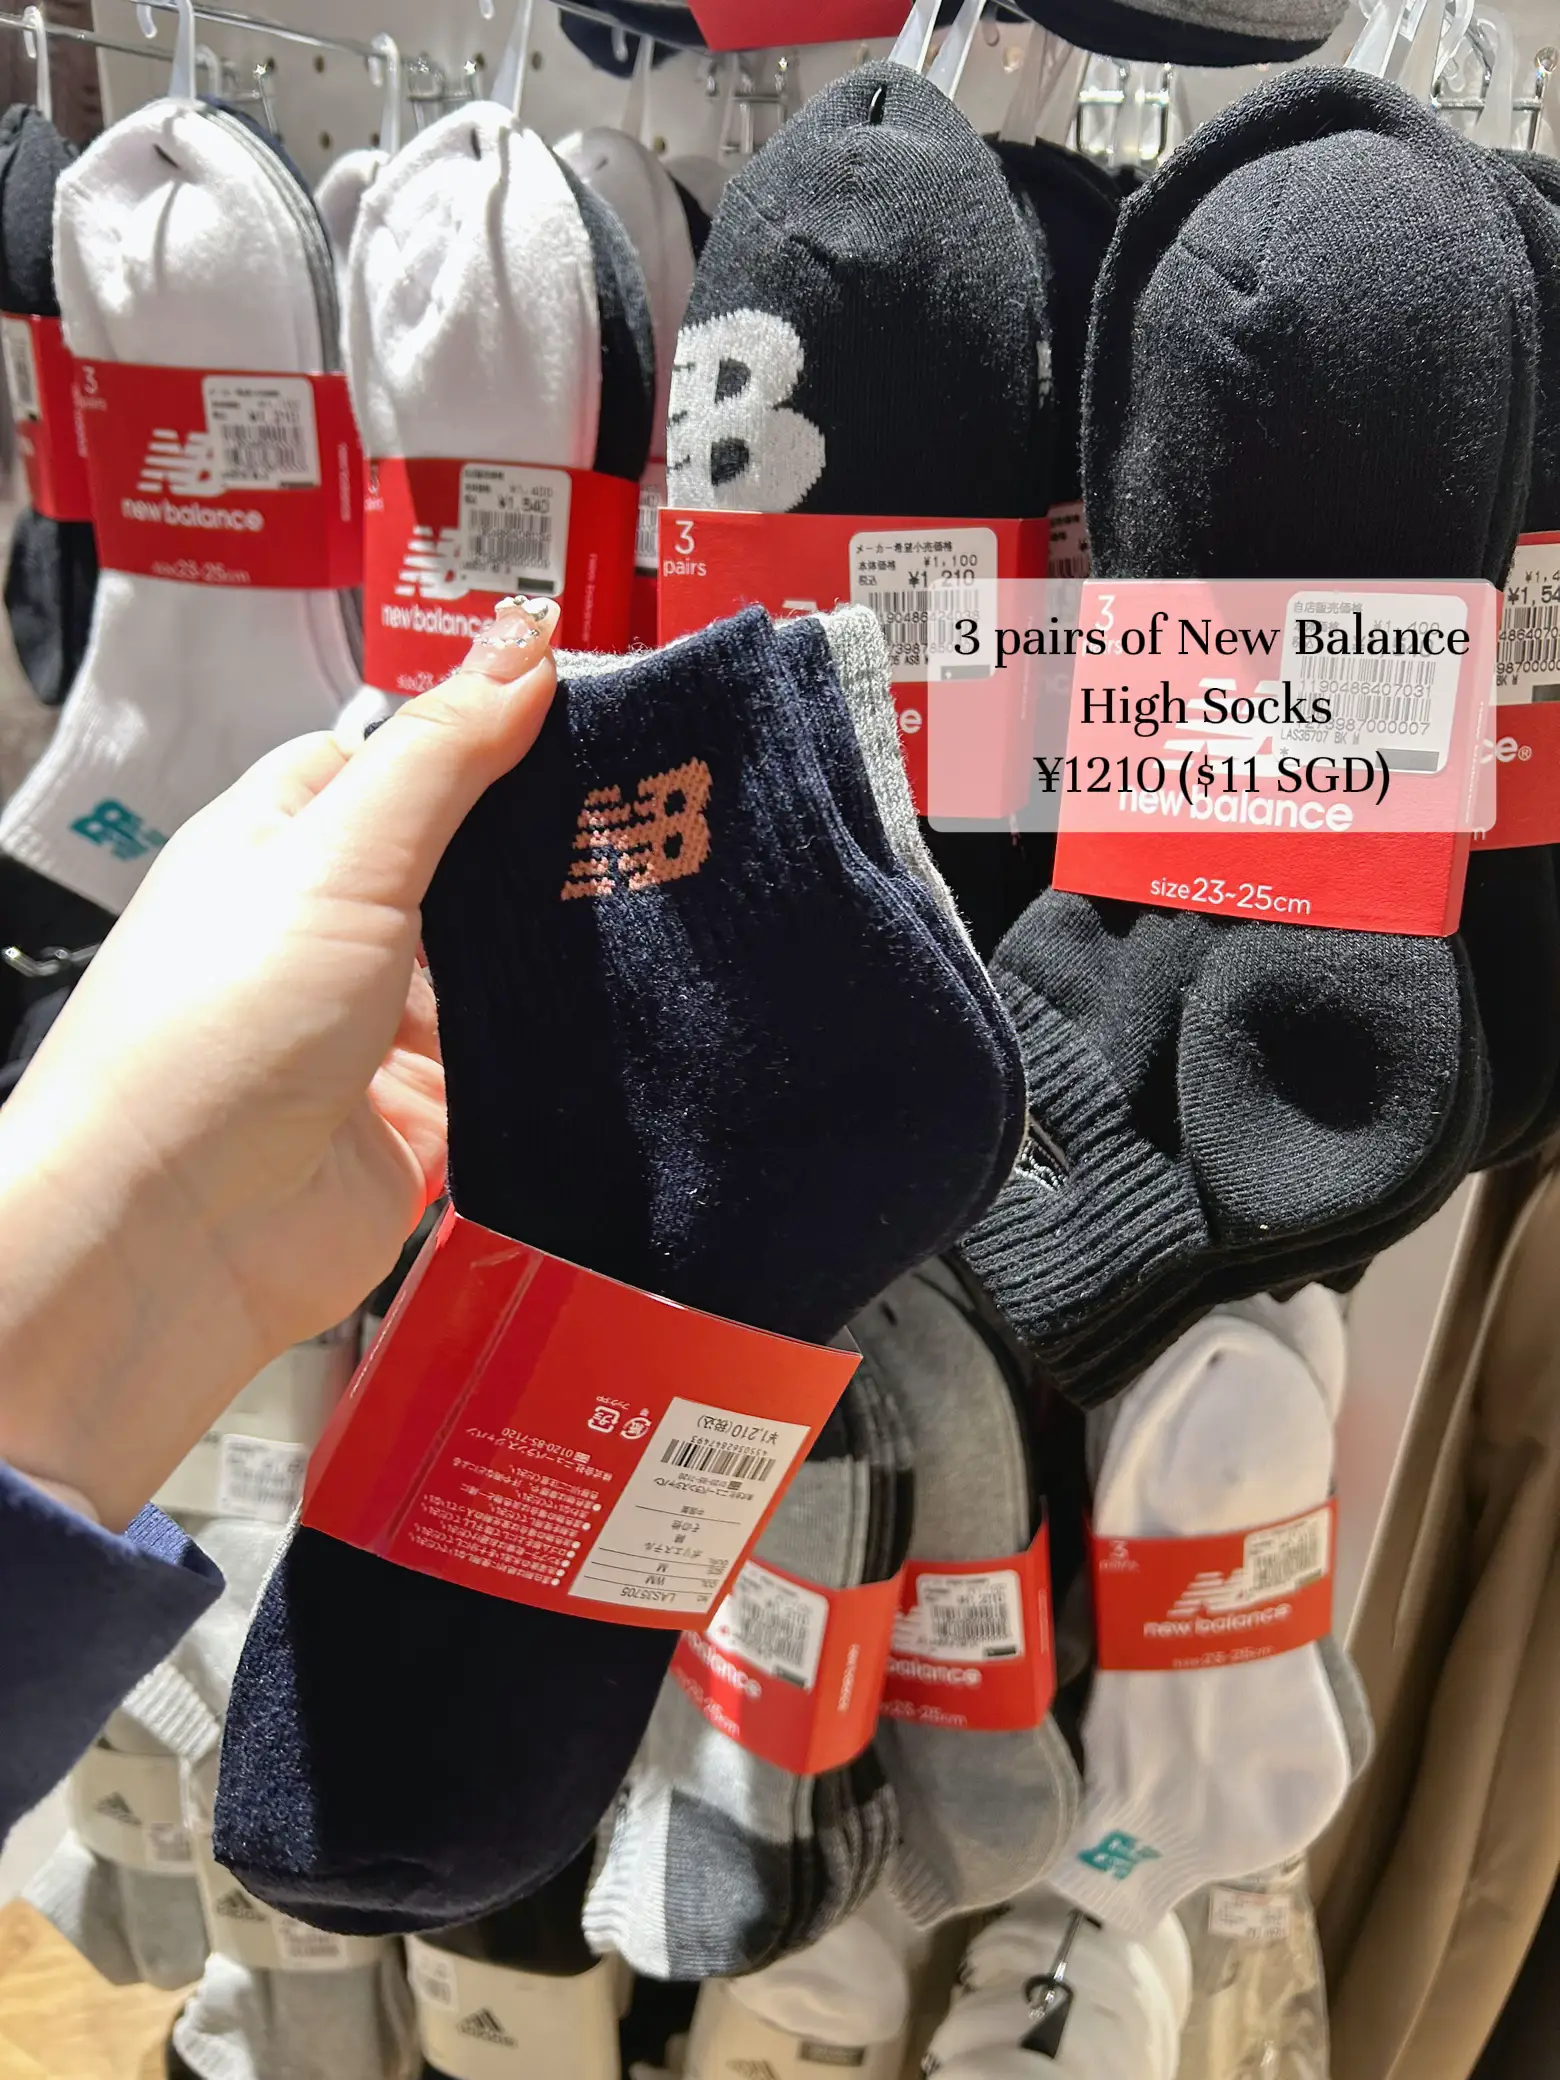 TRAVEL, What to buy from Uniqlo Japan🇯🇵, Gallery posted by 𝓘𝓼𝓪𝓫𝓮𝓵